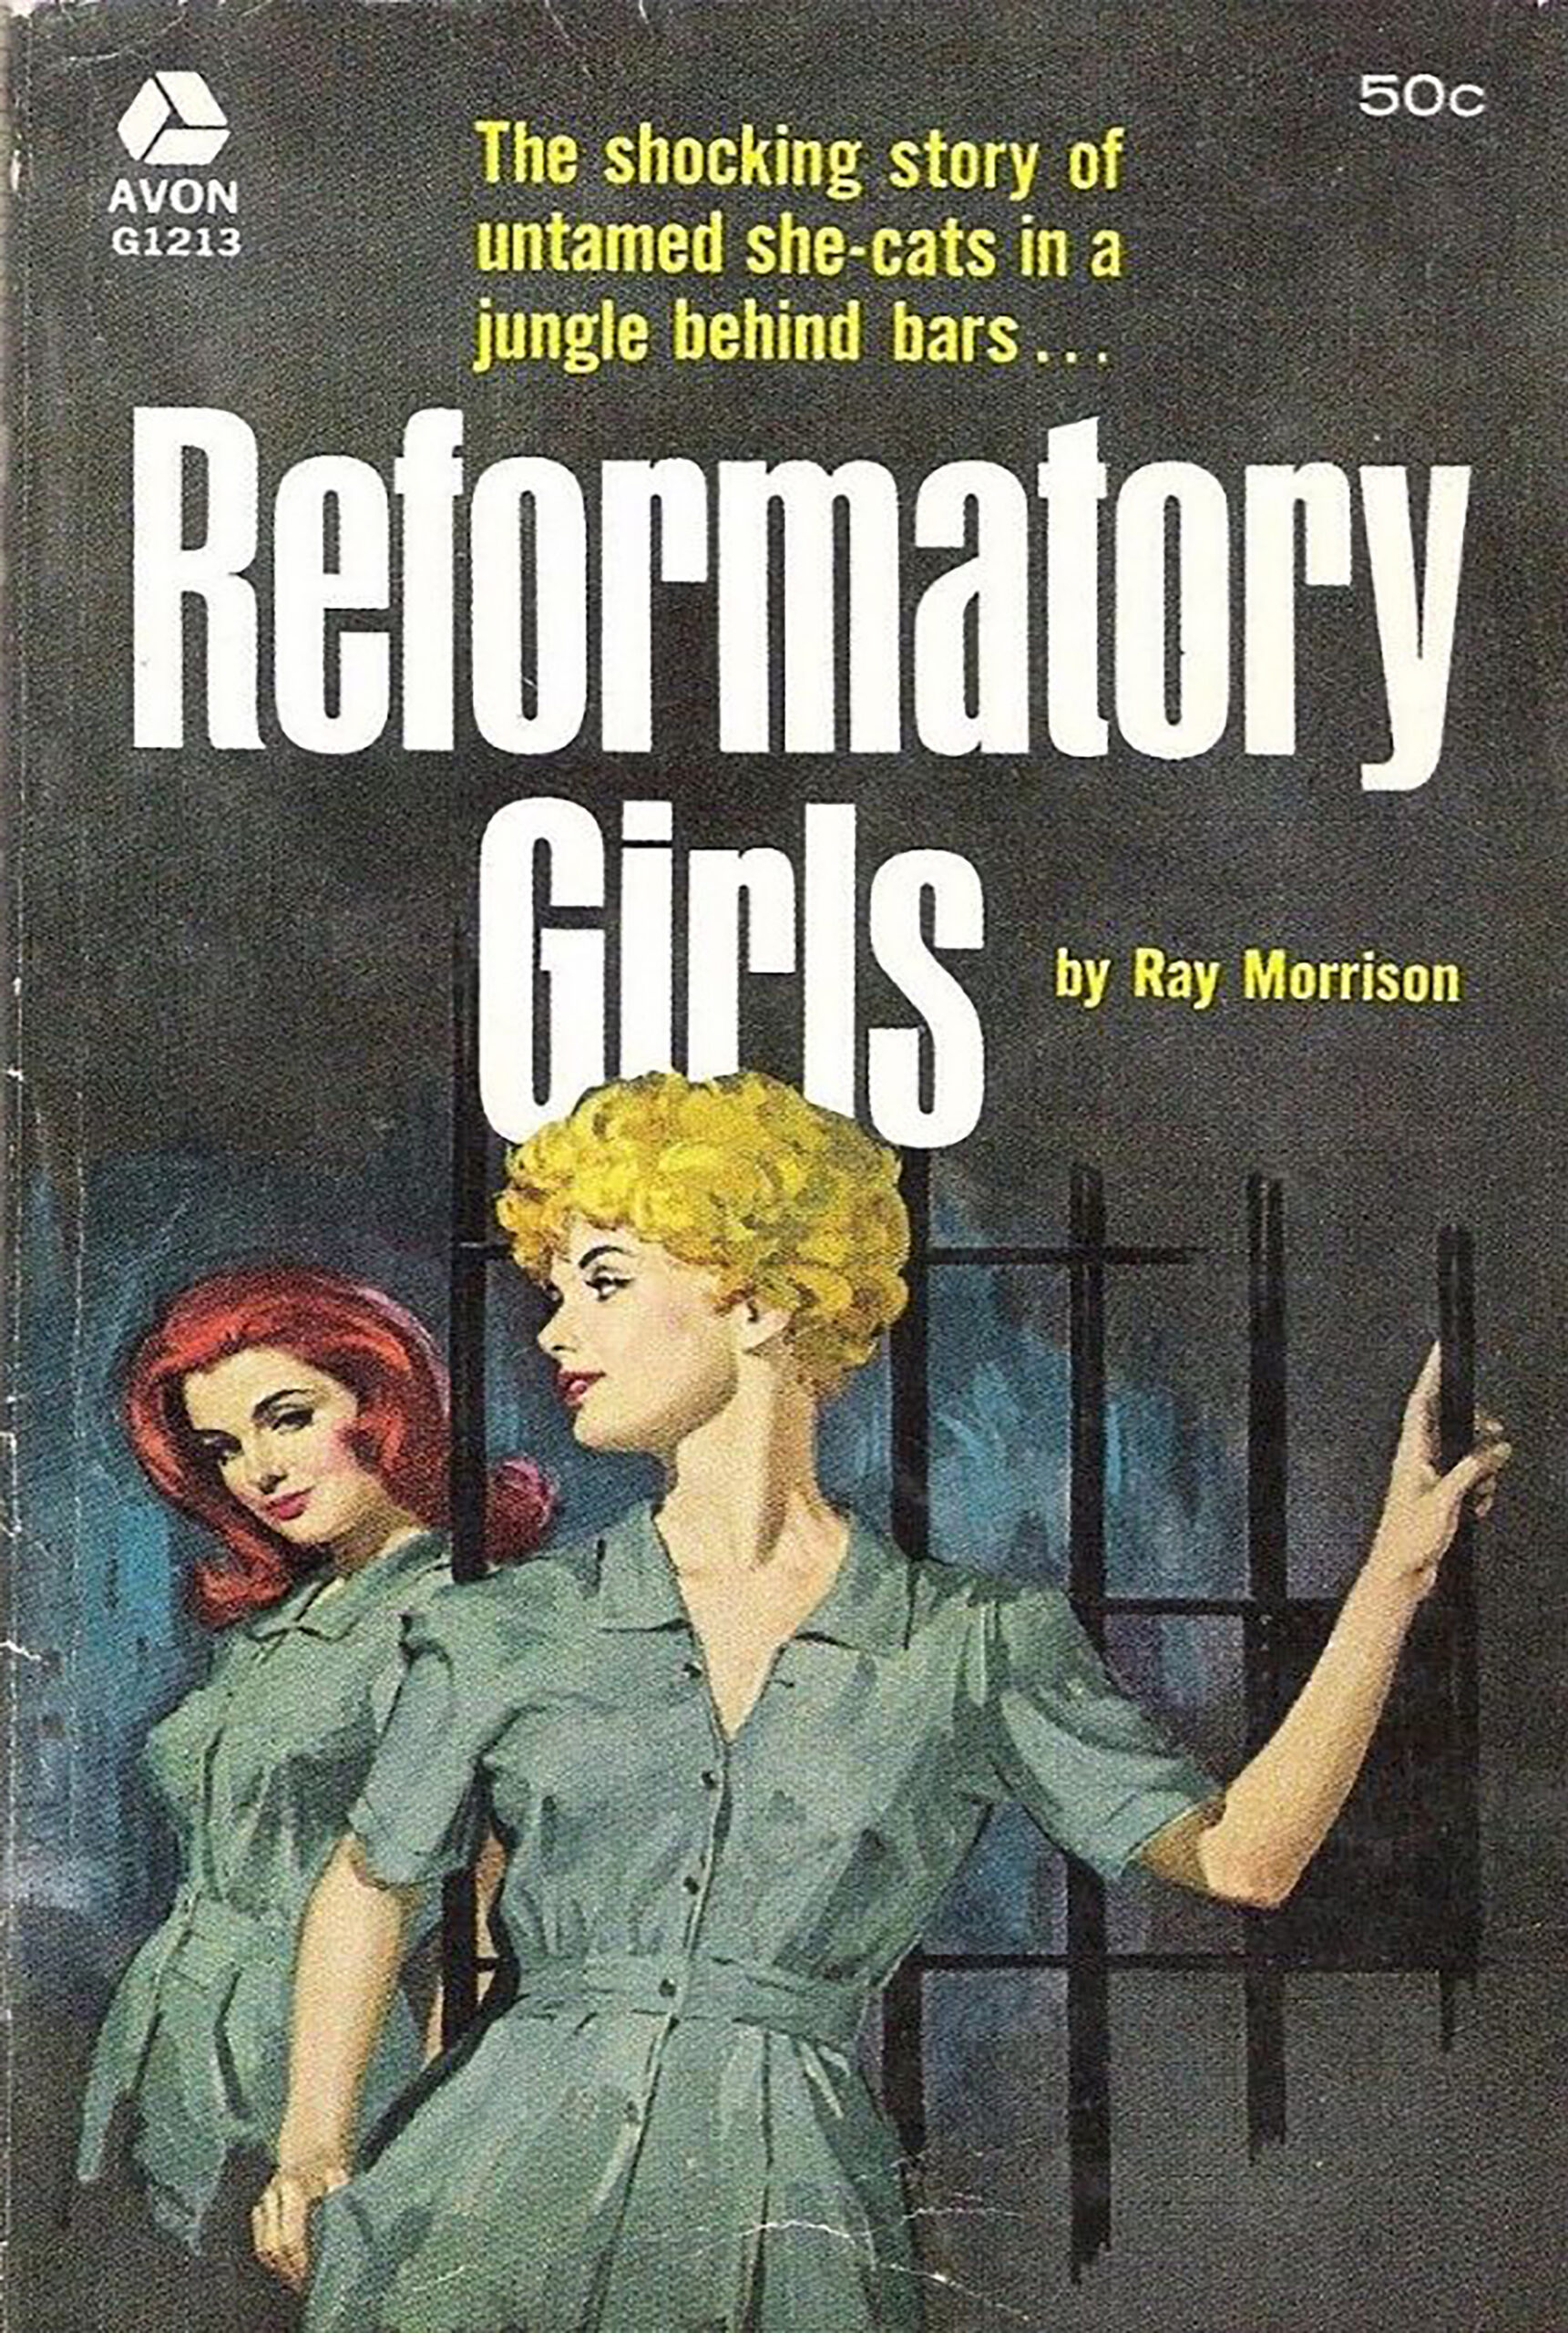 Reformatory Girls 1960 Pulp Erotica Cover Art Metal Poster Signs For Mankind